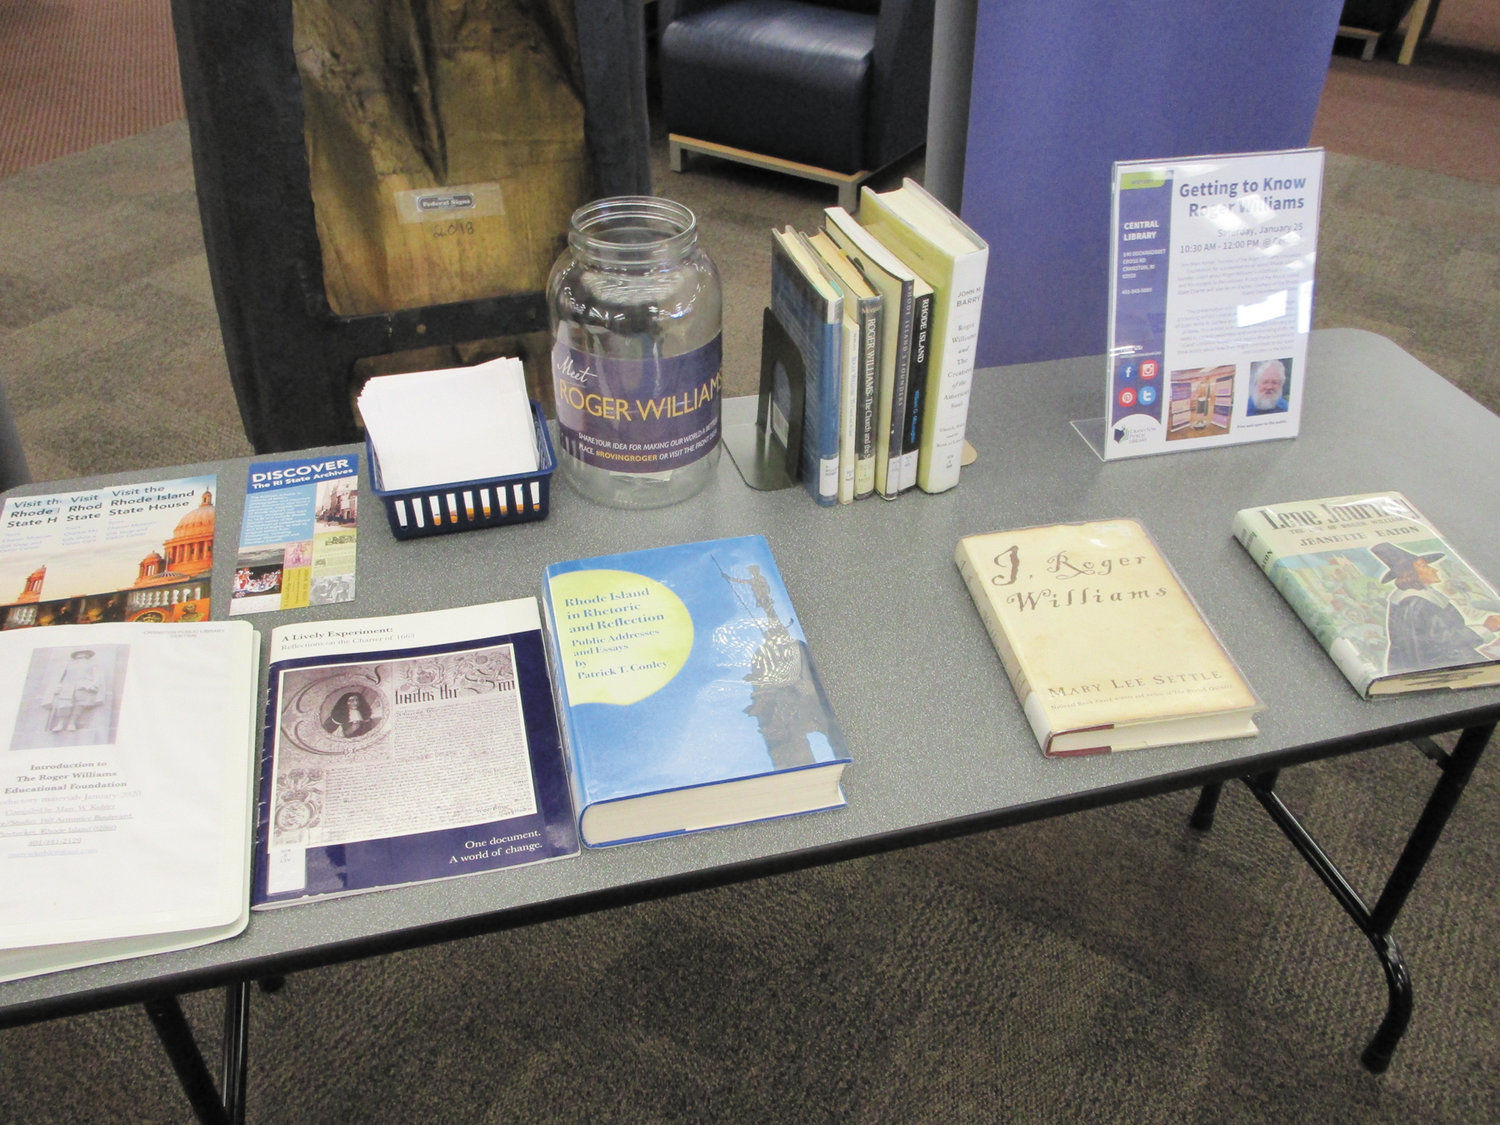 WEALTH OF MATERIALS: The “Roving Roger” exhibit, current at the Cranston Public Library, includes a host of books and other educational materials related to Rhode Island’s founder.